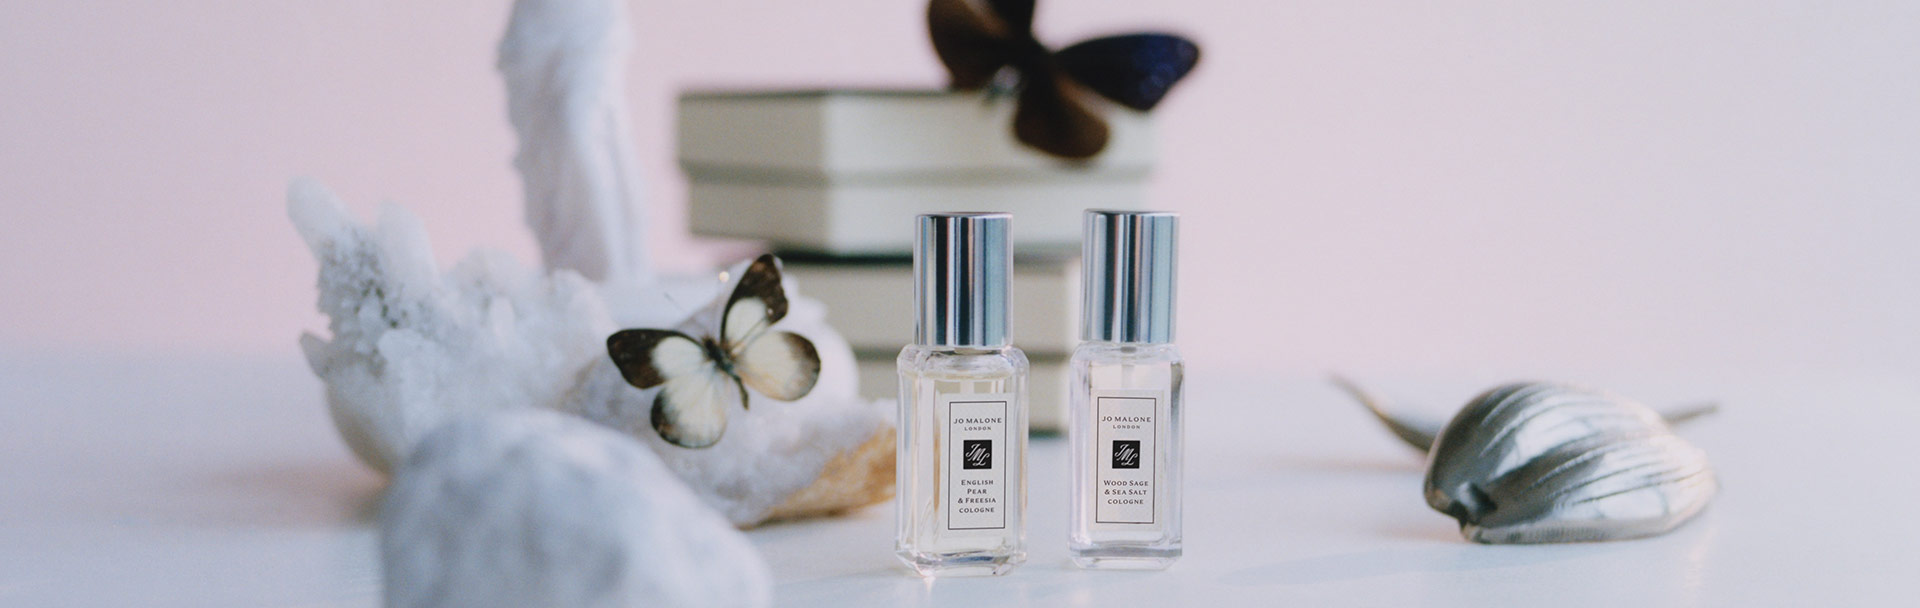 Jo Malone London iconic colognes in travel-friendly 9ml sizes. 